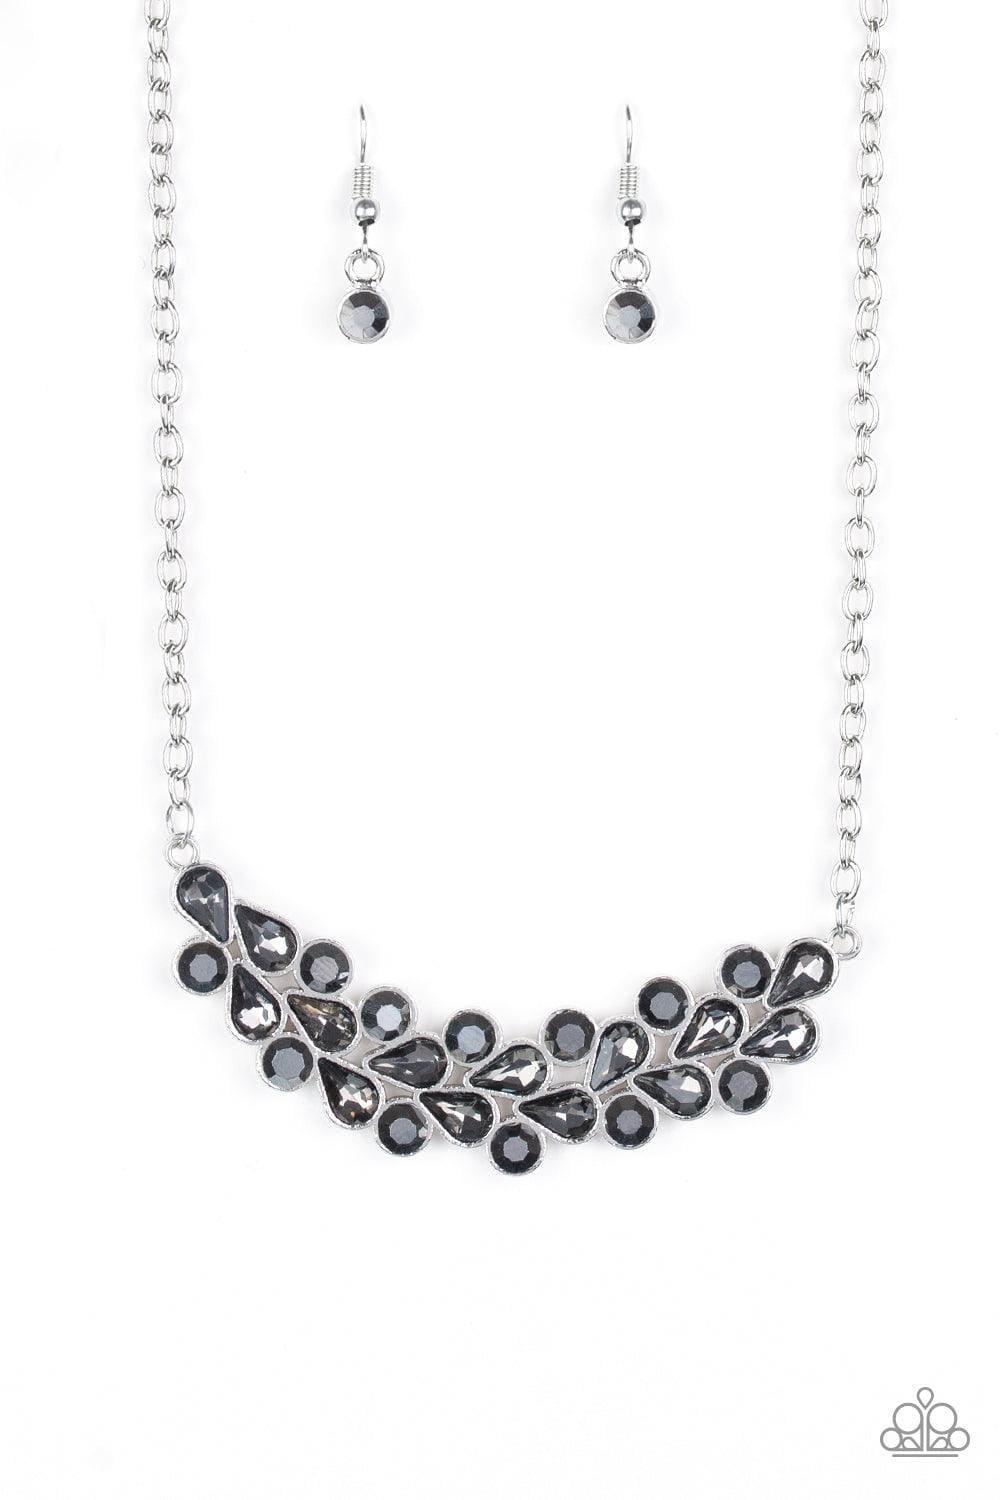 Paparazzi Accessories - Special Treatment - Silver Necklace - Bling by JessieK